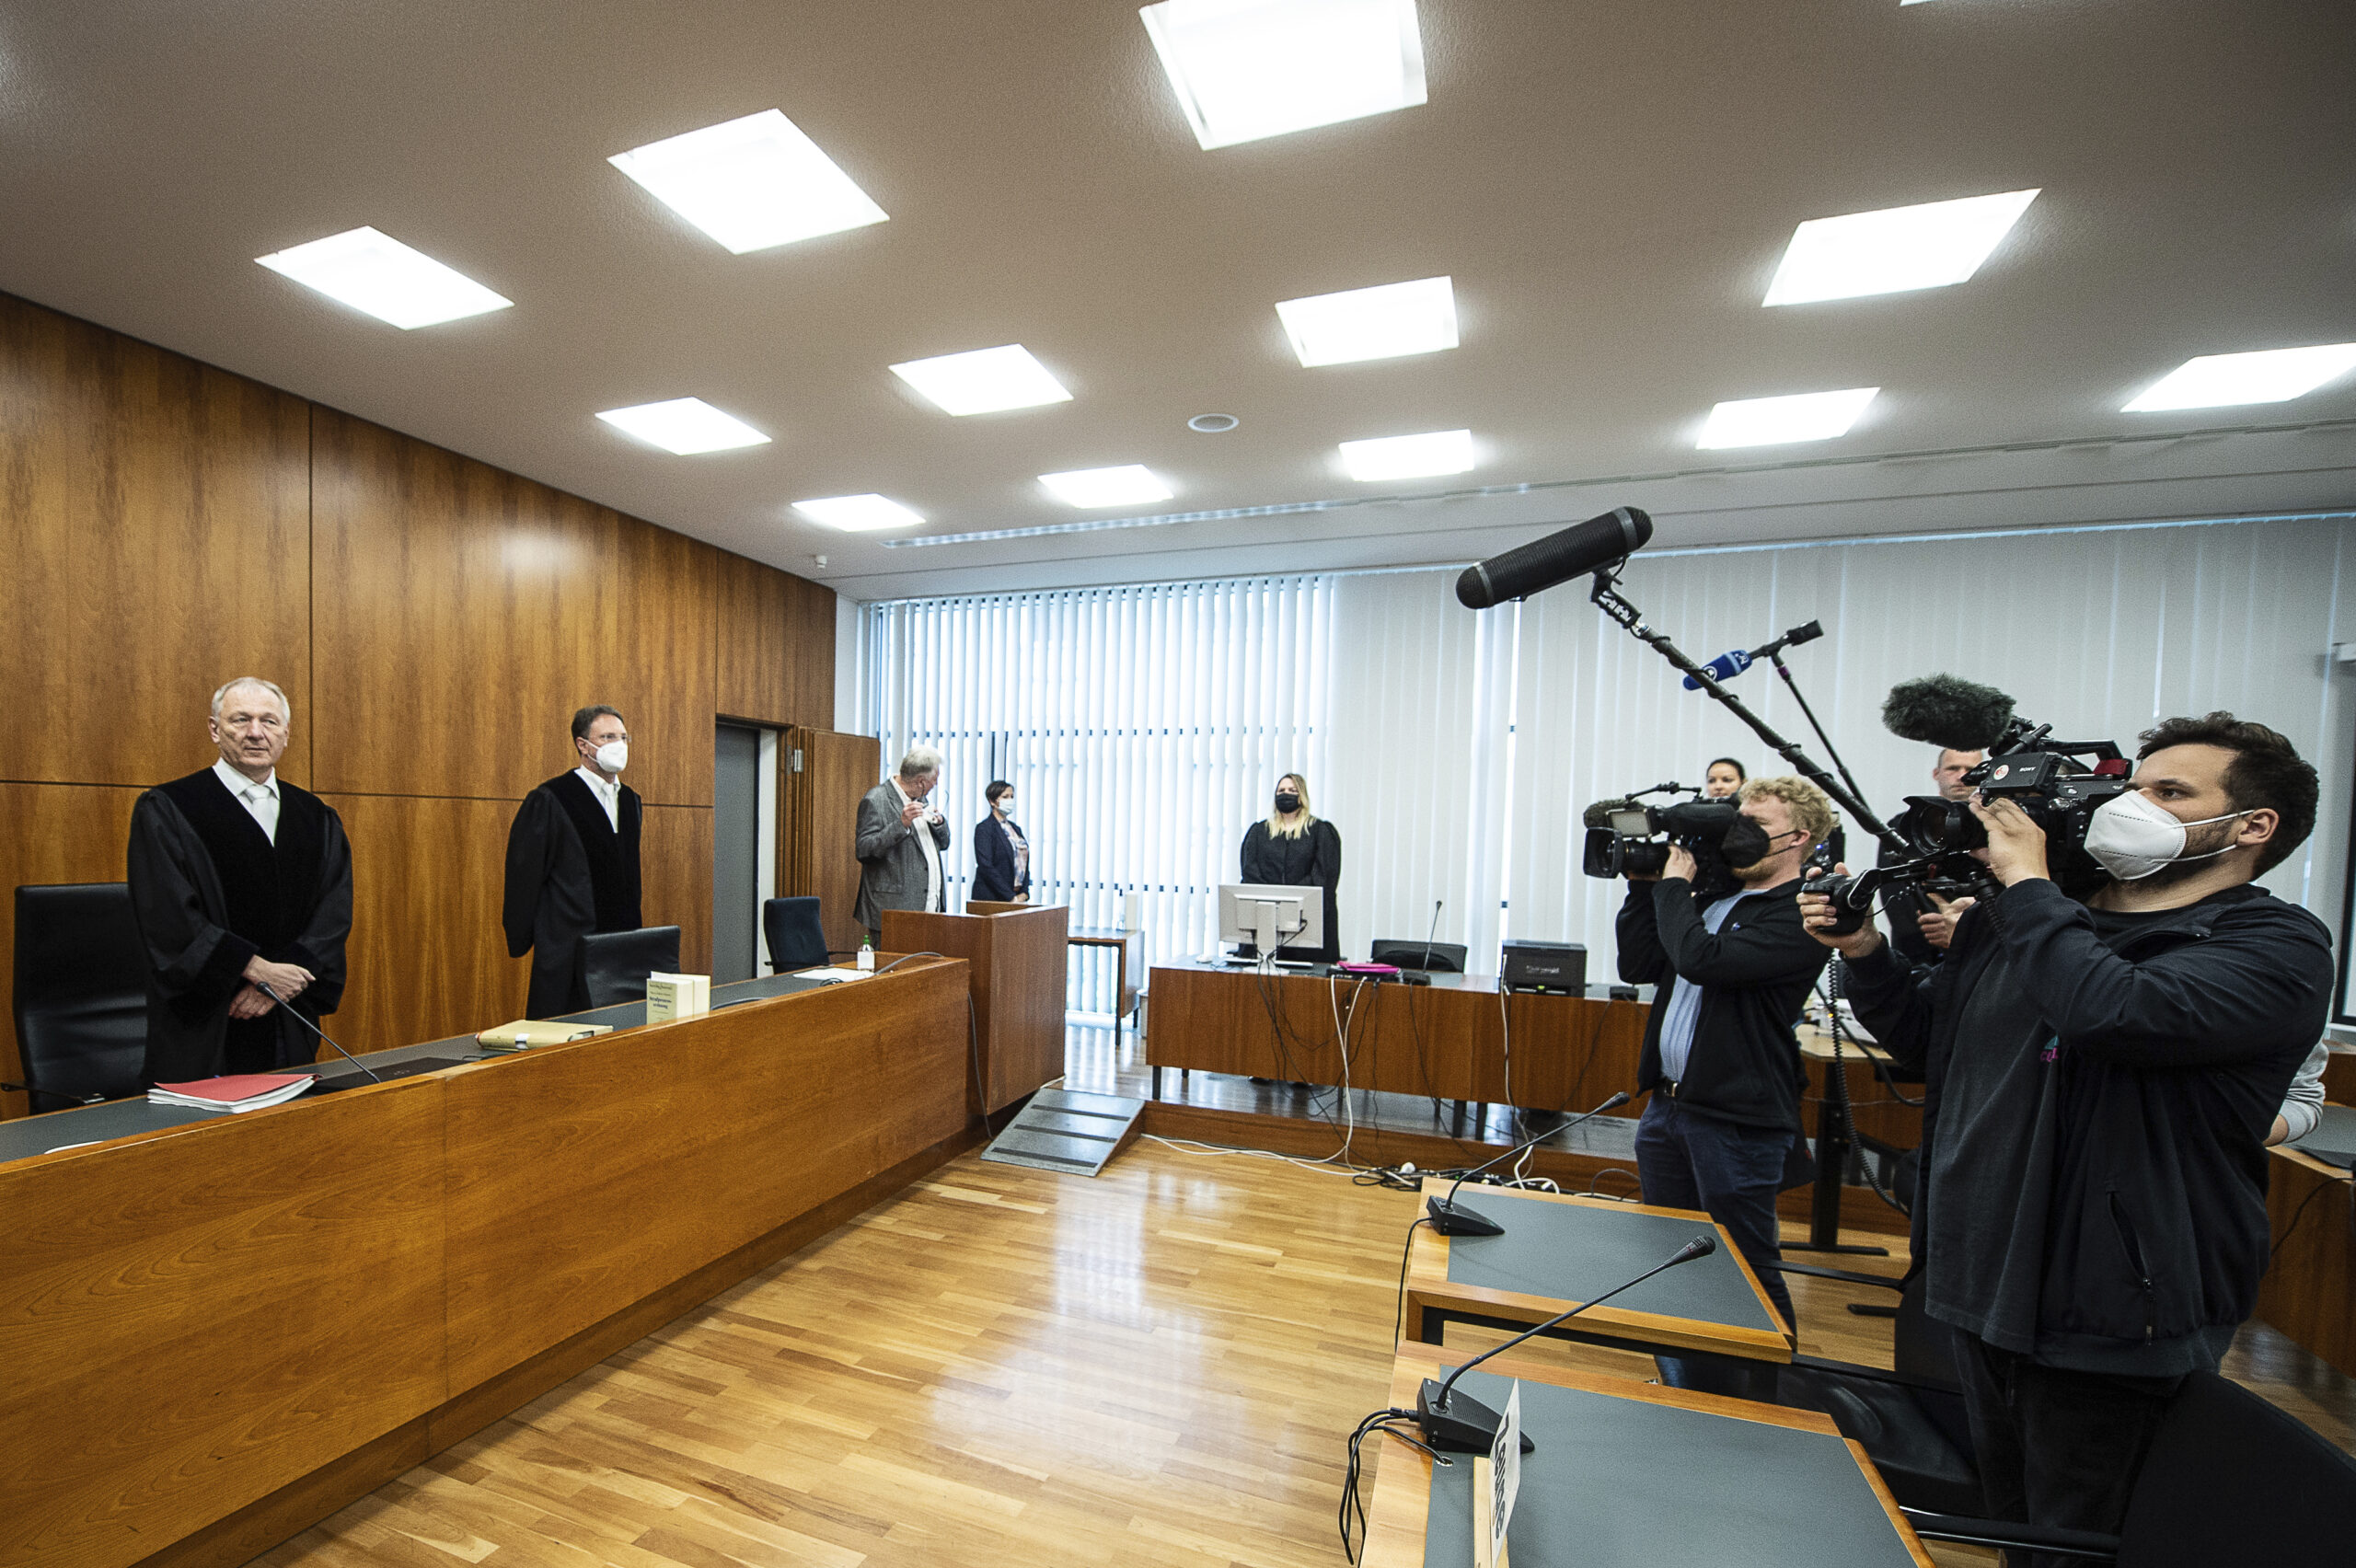 Volker Muetze (l), presiding judge at the Regional Court, stands in the courtroom for the opening in Kassel, HGermany, Wednesday, May 25, 2022. A German court on Wednesday sentenced a woman who posed as a fake doctor and caused the deaths of several of people to life imprisonment for three counts of murder, among other charges. (Swen Pfoertner/dpa via AP)